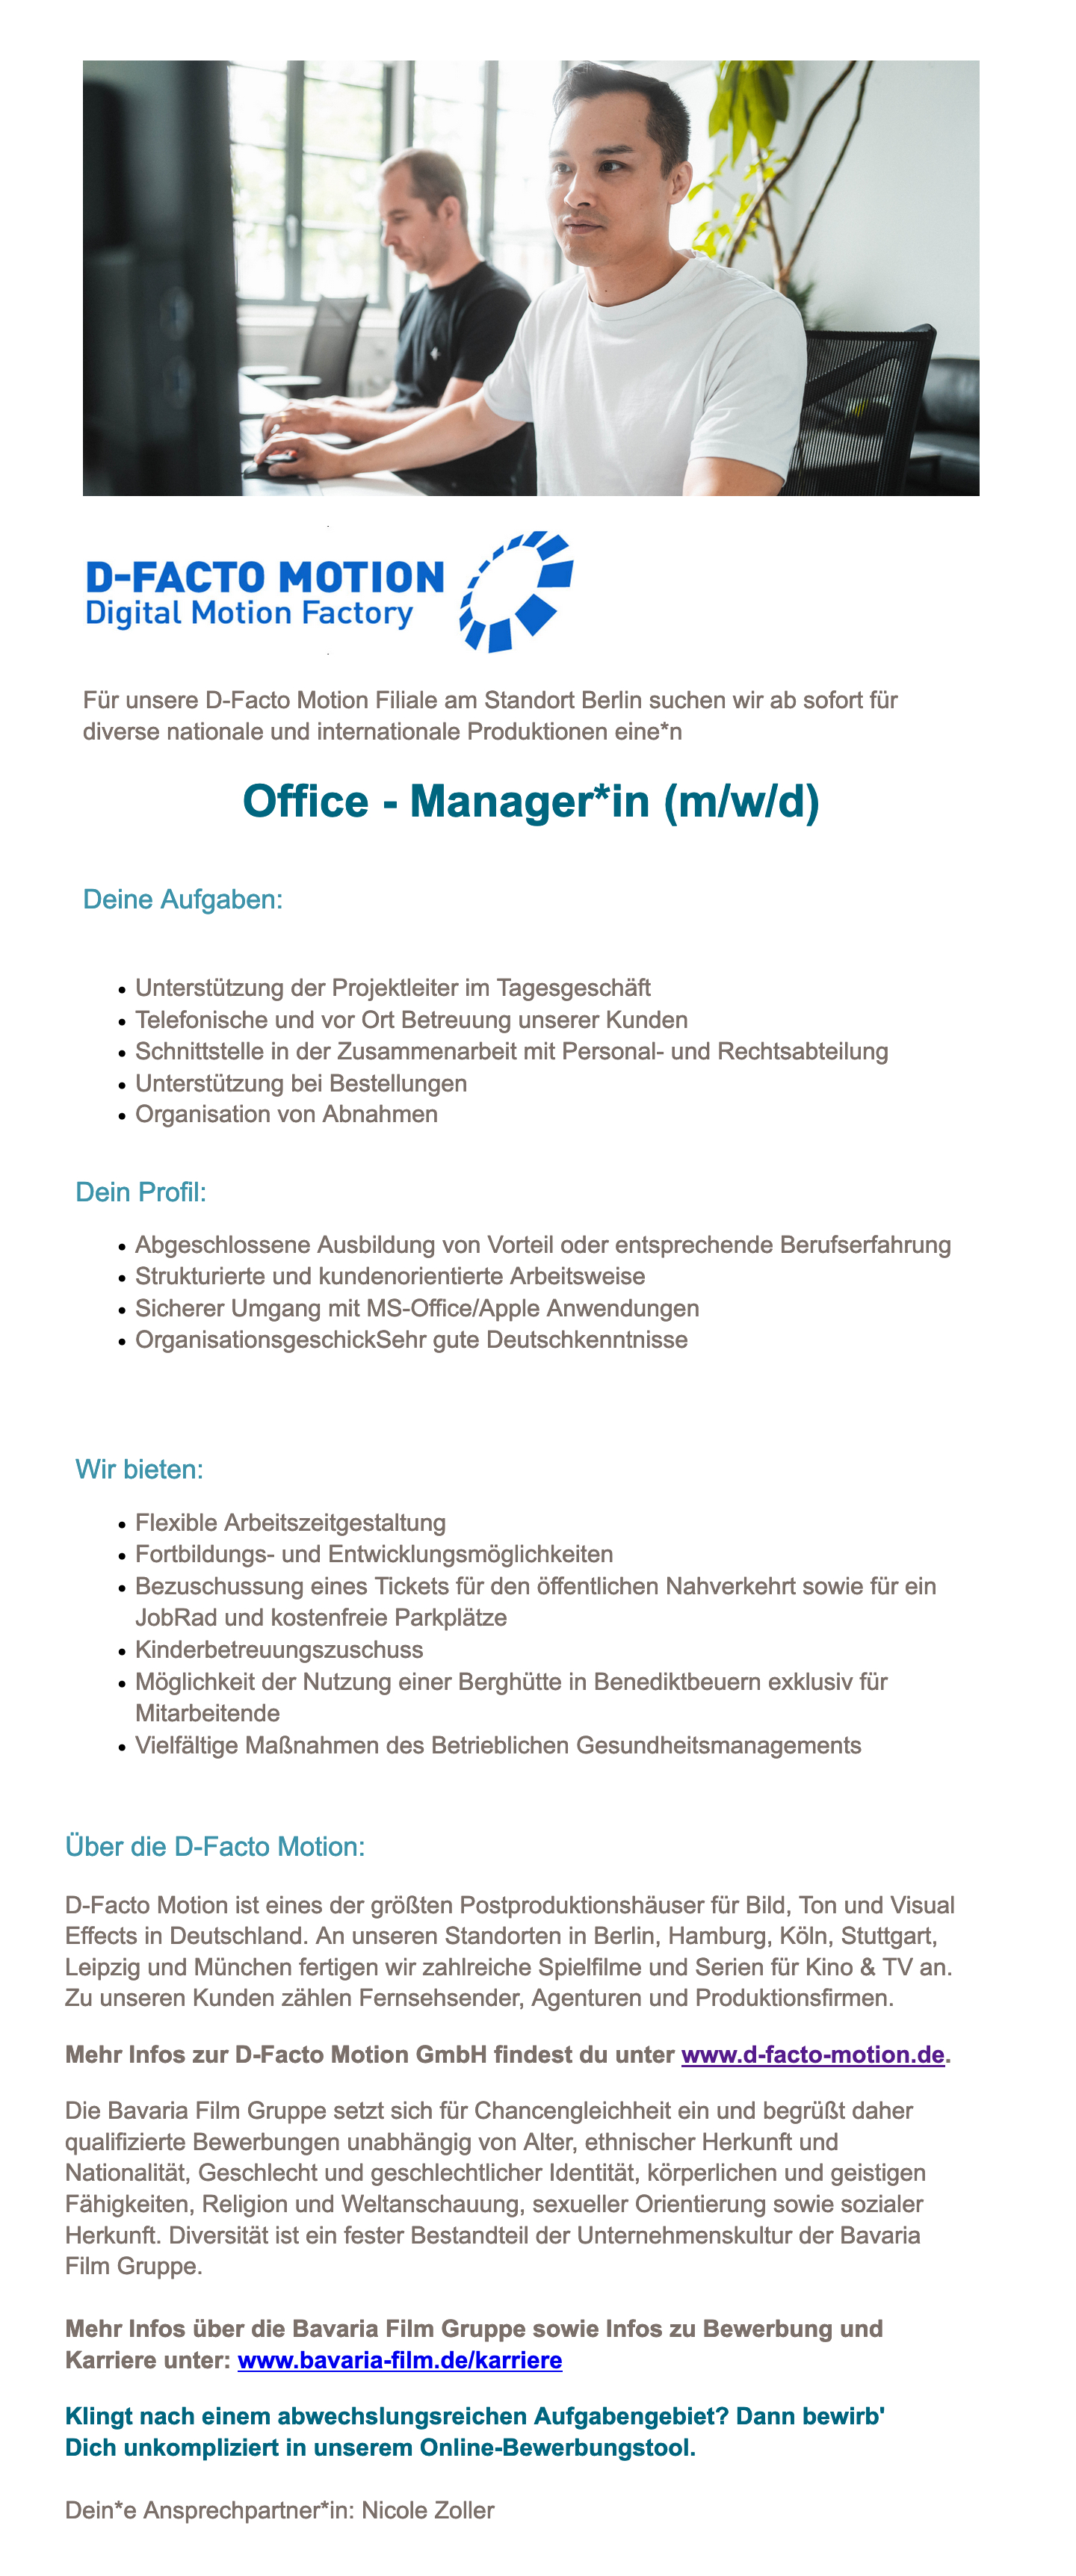 Office-Manager*in (m/w/d)